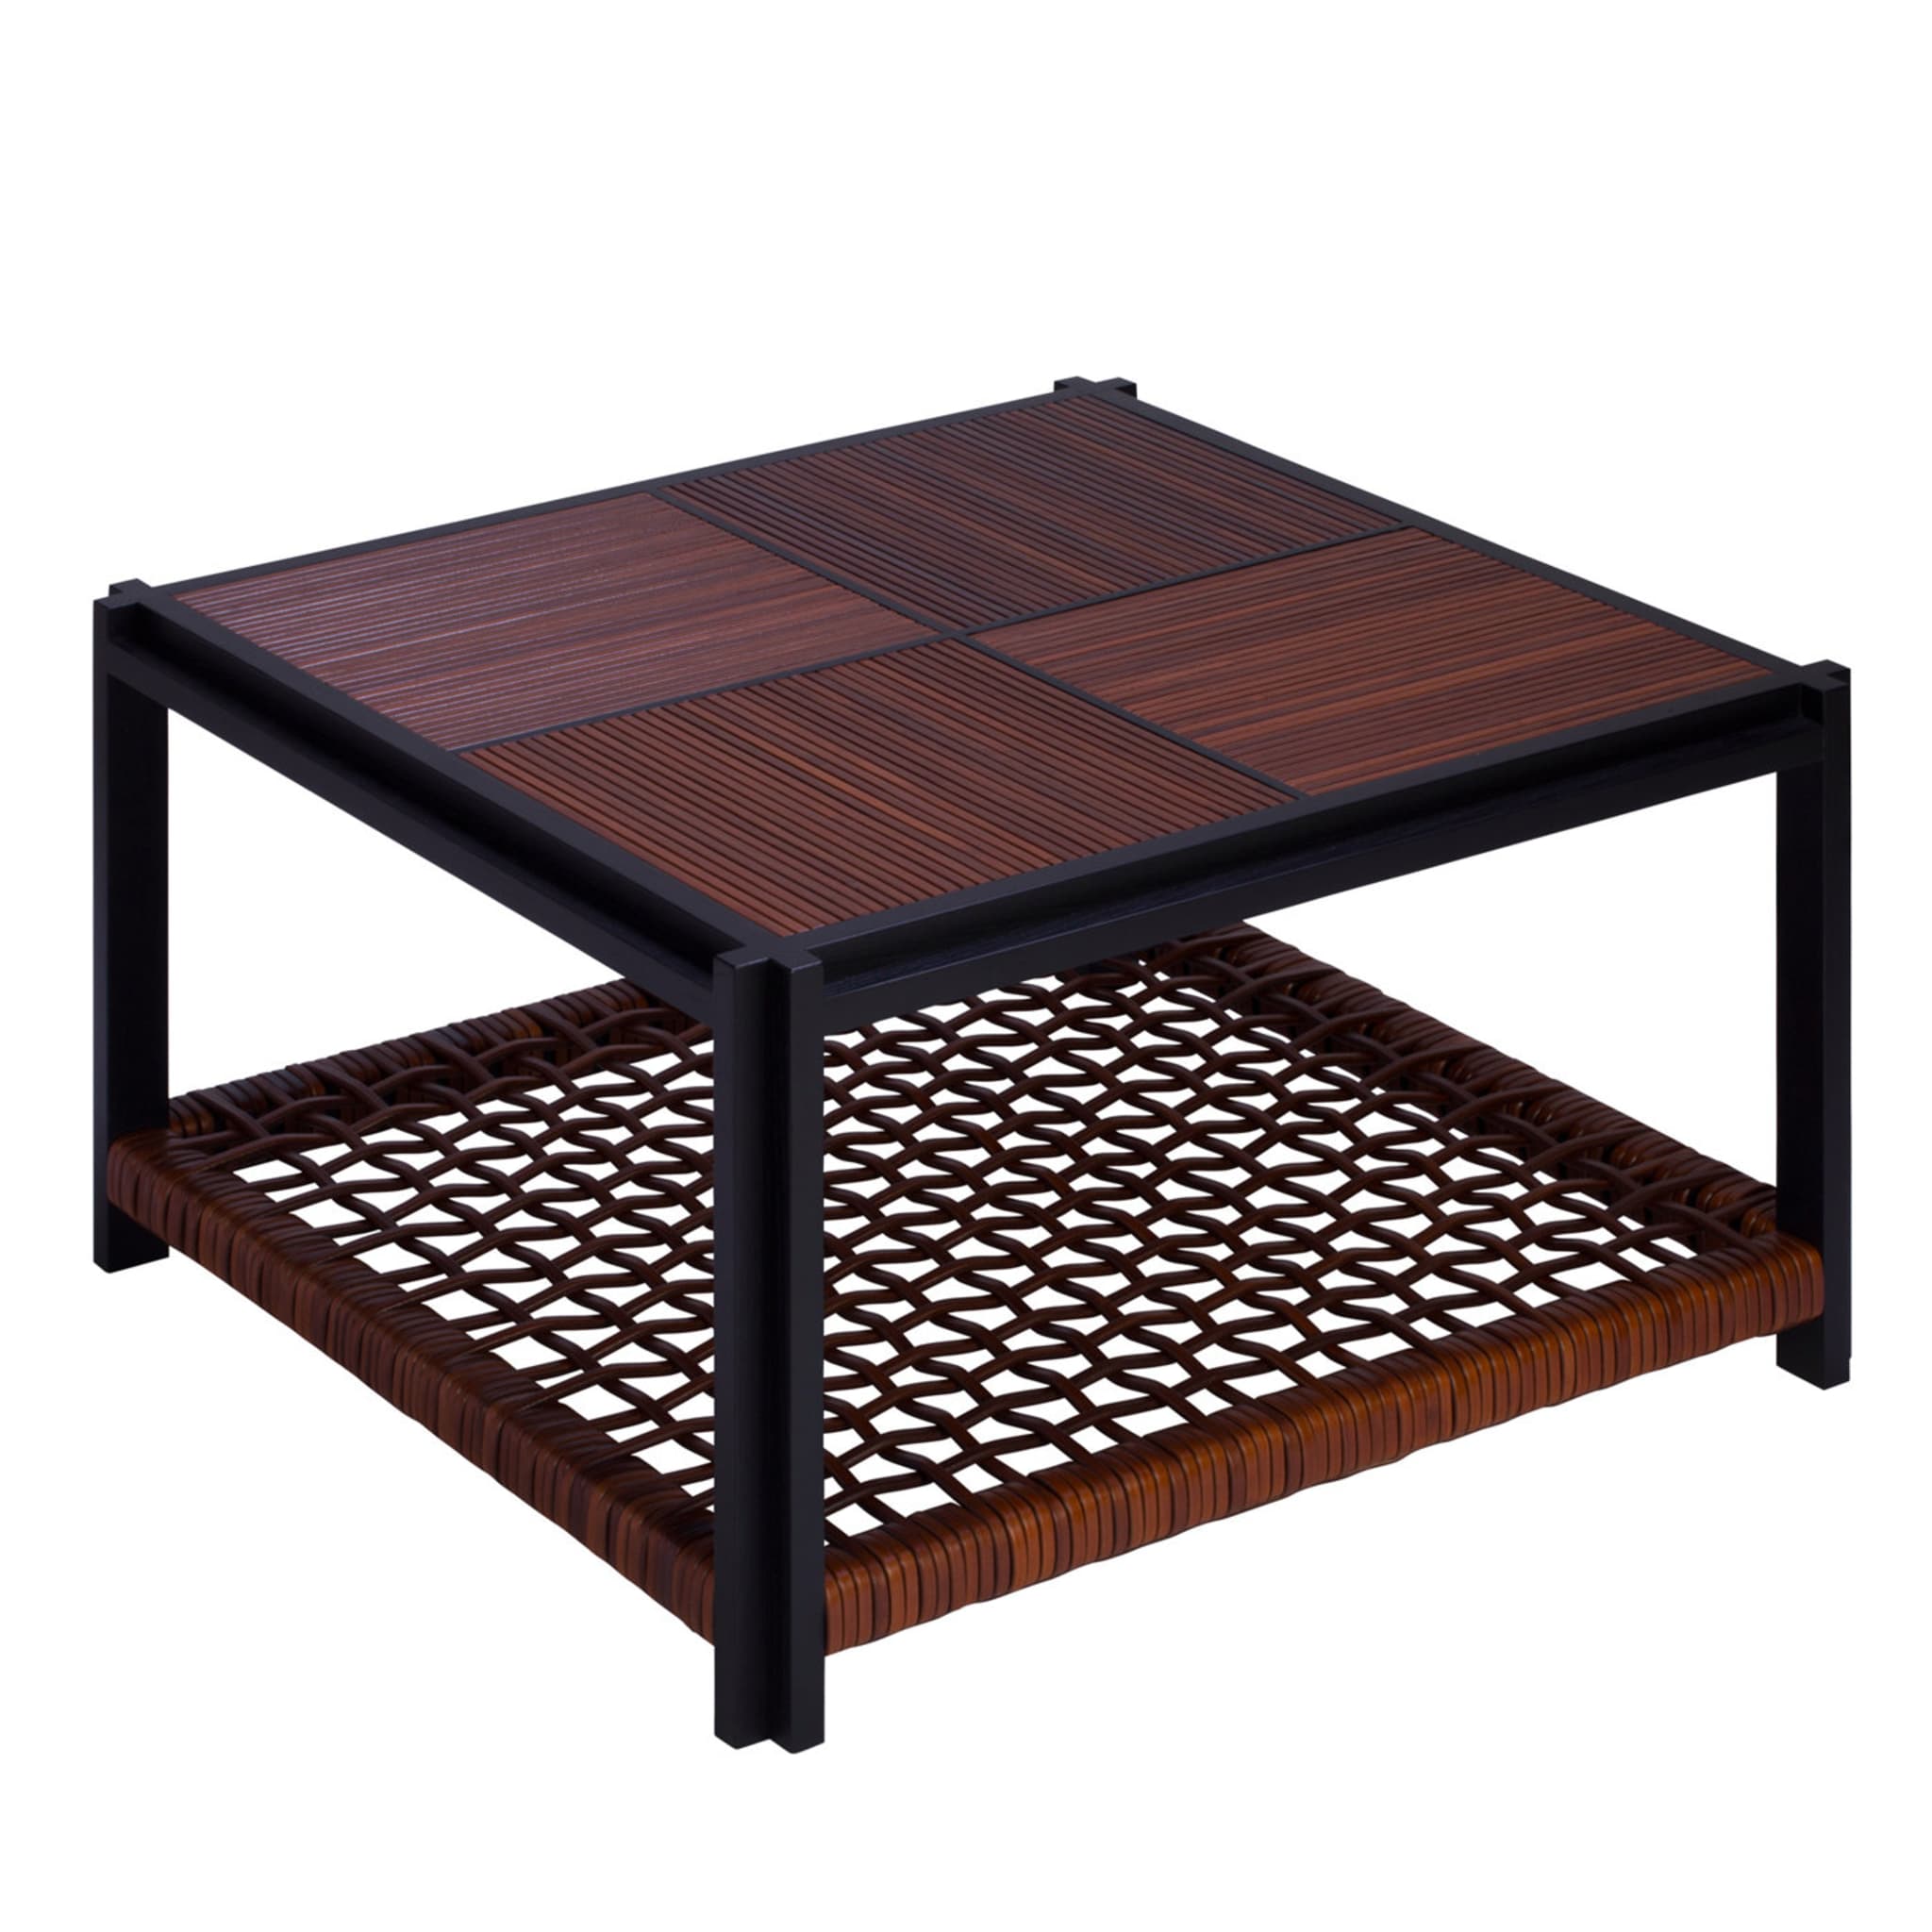 Structura Crisscross 2-Level Square Coffee Table - Main view